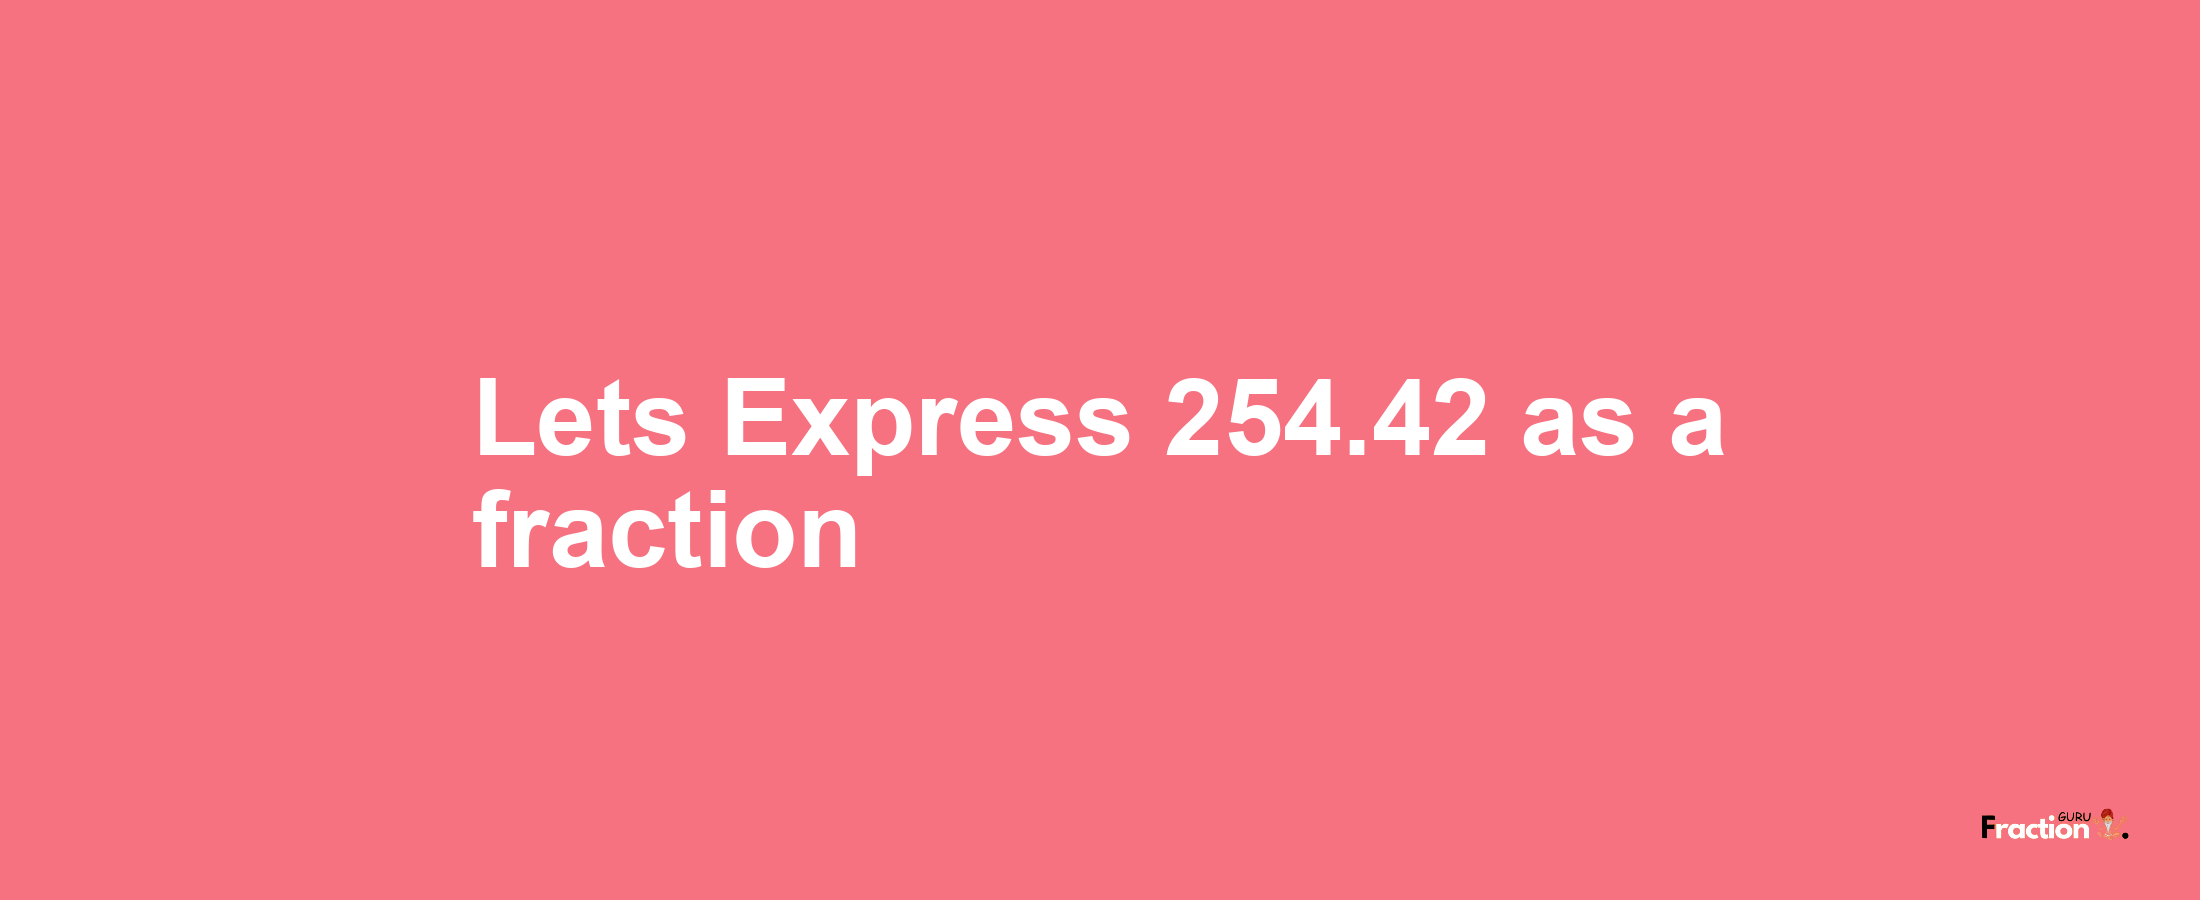 Lets Express 254.42 as afraction